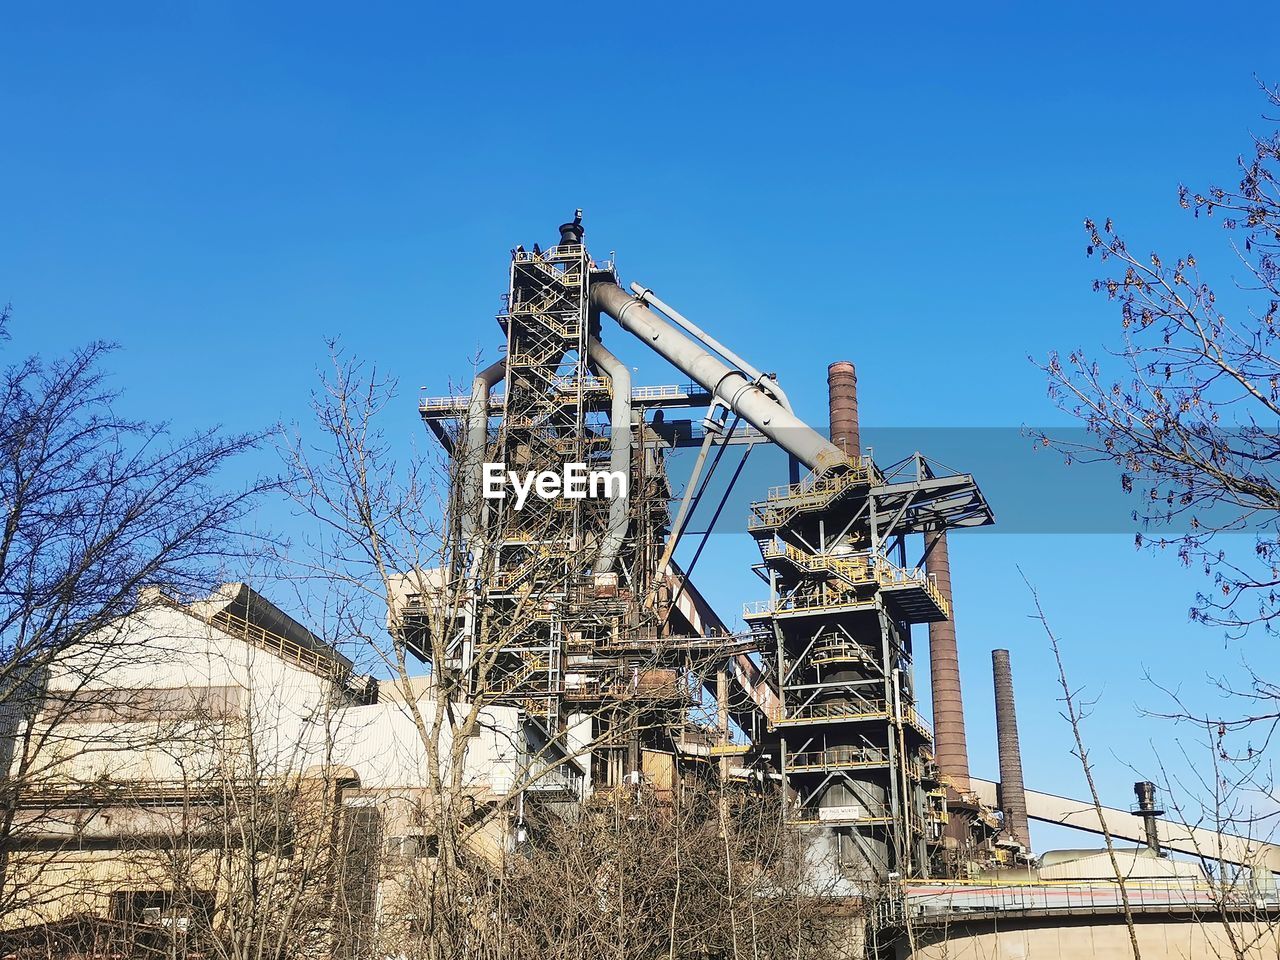 sky, architecture, blue, industry, tree, nature, bare tree, built structure, clear sky, plant, no people, day, low angle view, sunny, power generation, outdoors, machinery, building exterior, sunlight